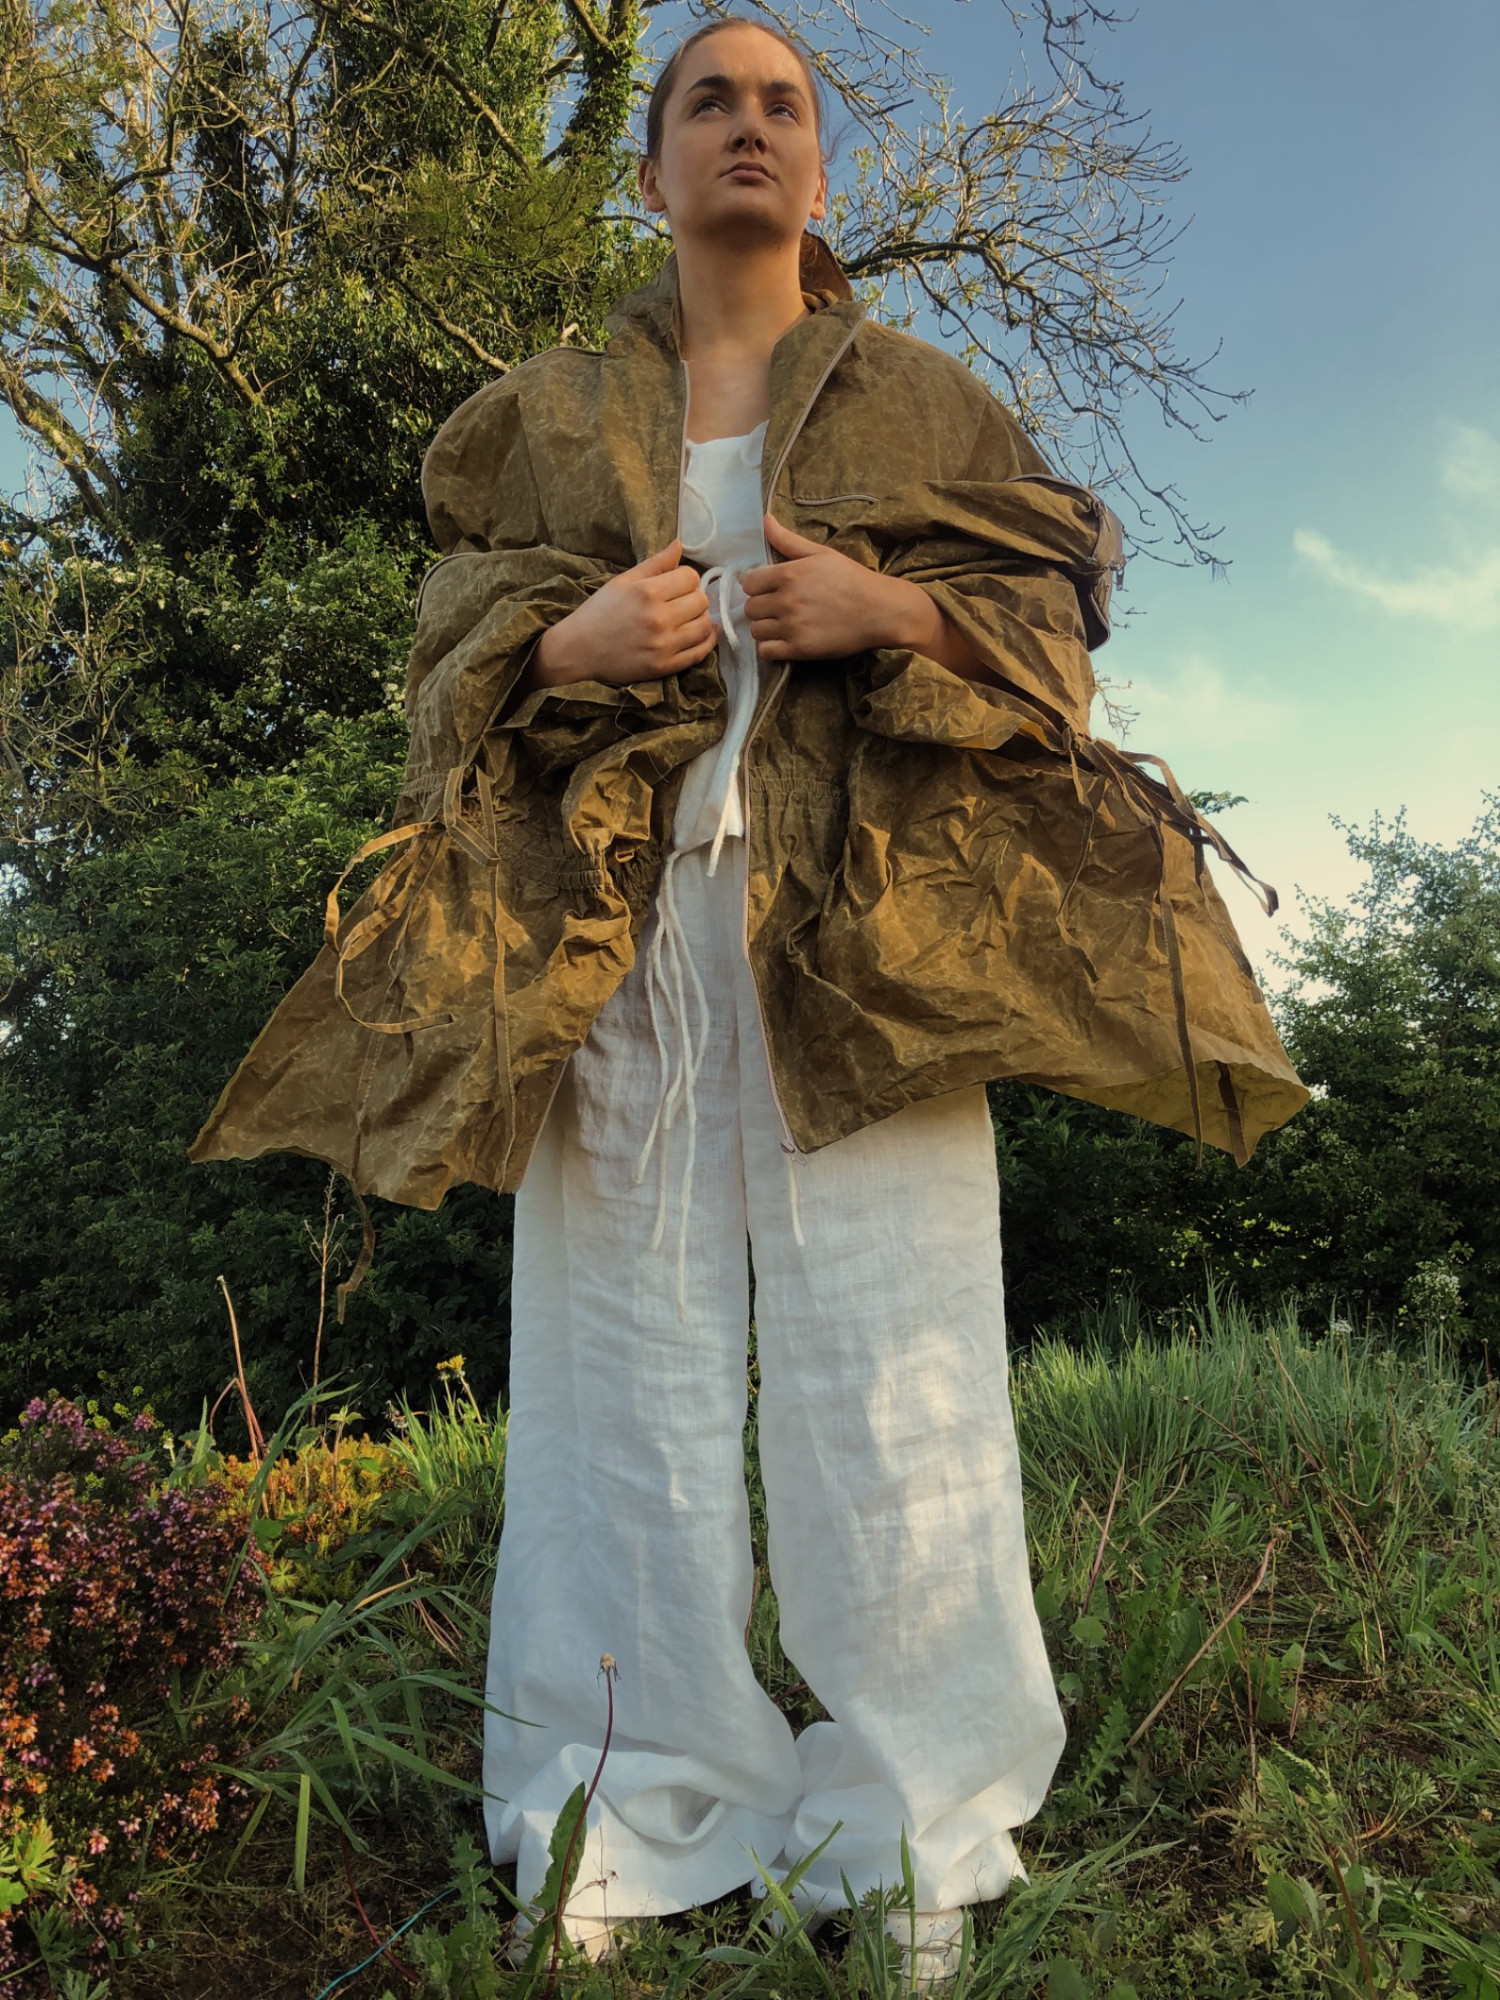 The transformable beeswax cotton raincoat